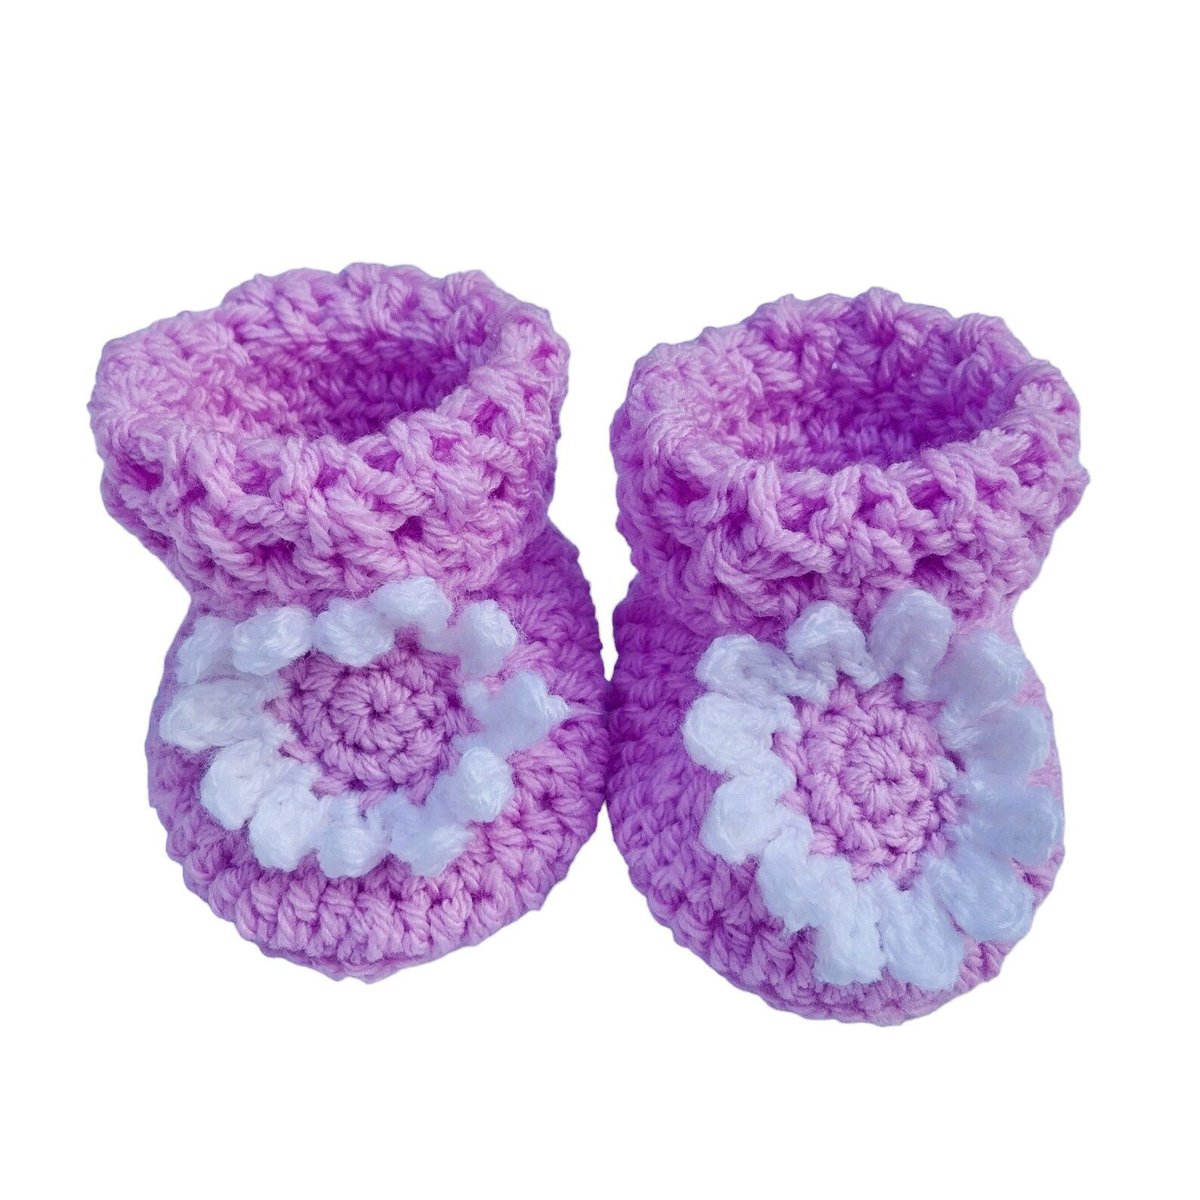 Welcome your newborn with these adorable hand-crocheted lilac baby booties, complete with a white daisy applique. Perfect fit for babies aged 0-3 months. Shop now on #Etsy: knittingtopia.etsy.com/listing/156916… #HandmadeLove #Knittingtopia #babyshowergifts #craftbizparty